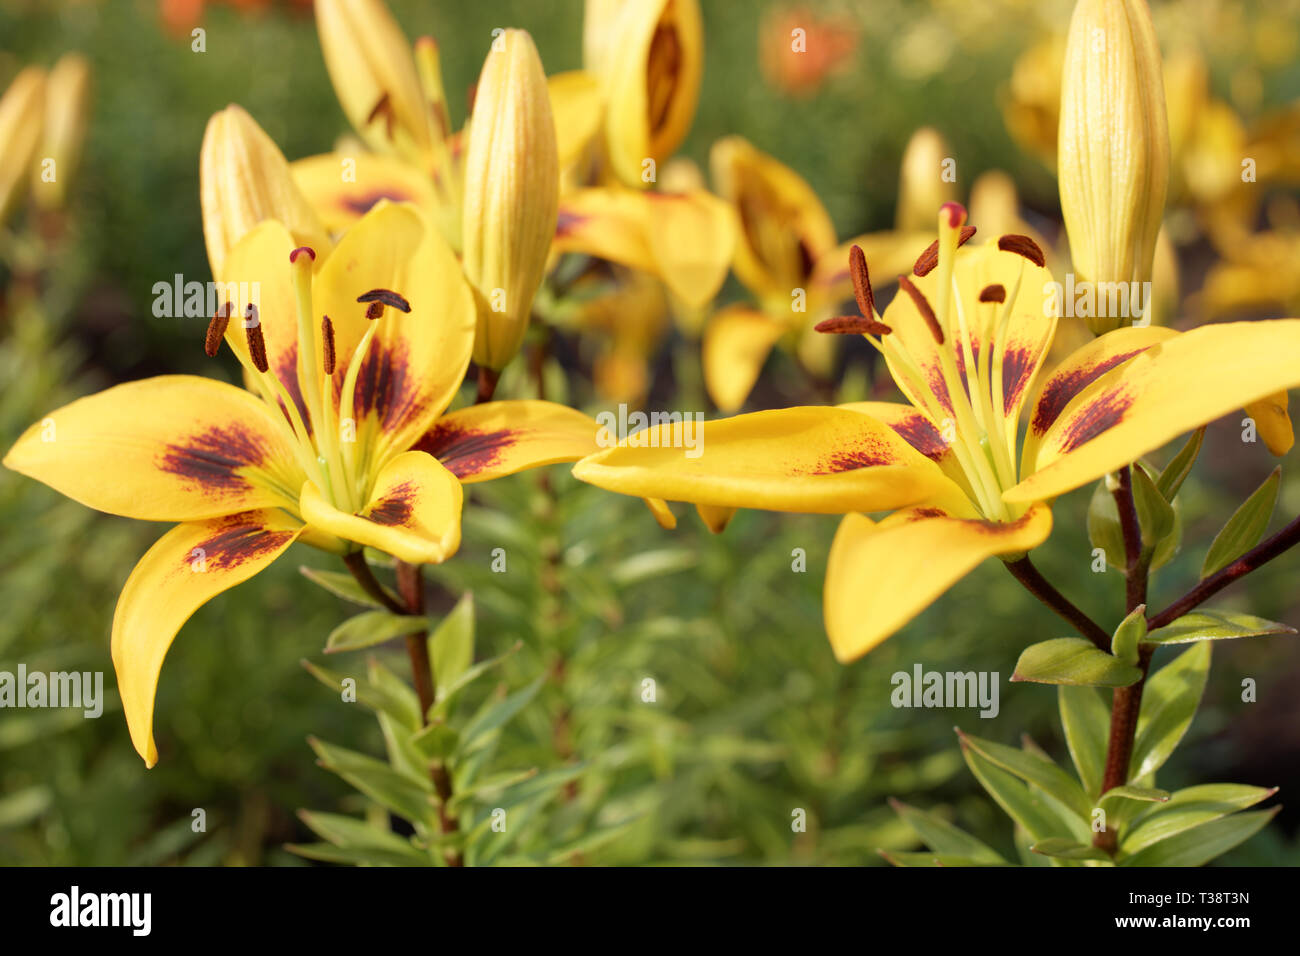 Yellow lily flowers in a garden in a summer day Stock Photo